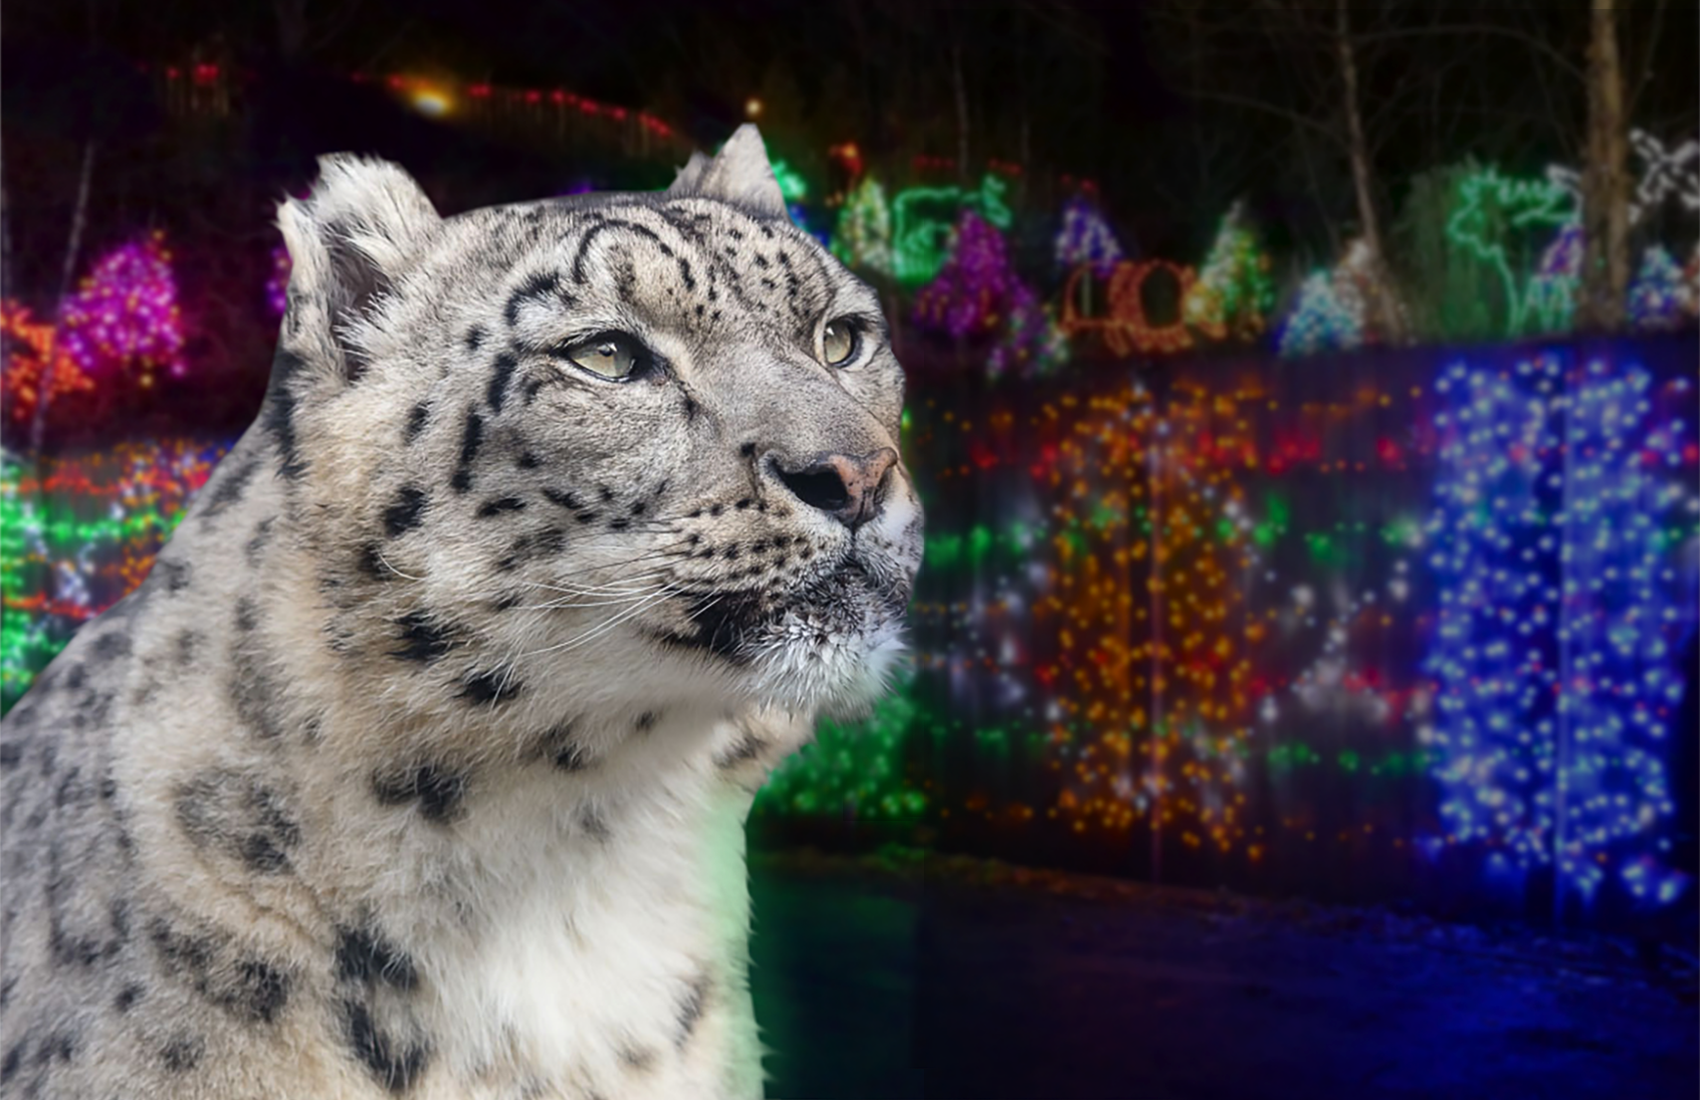 Snow leopard with holiday lights